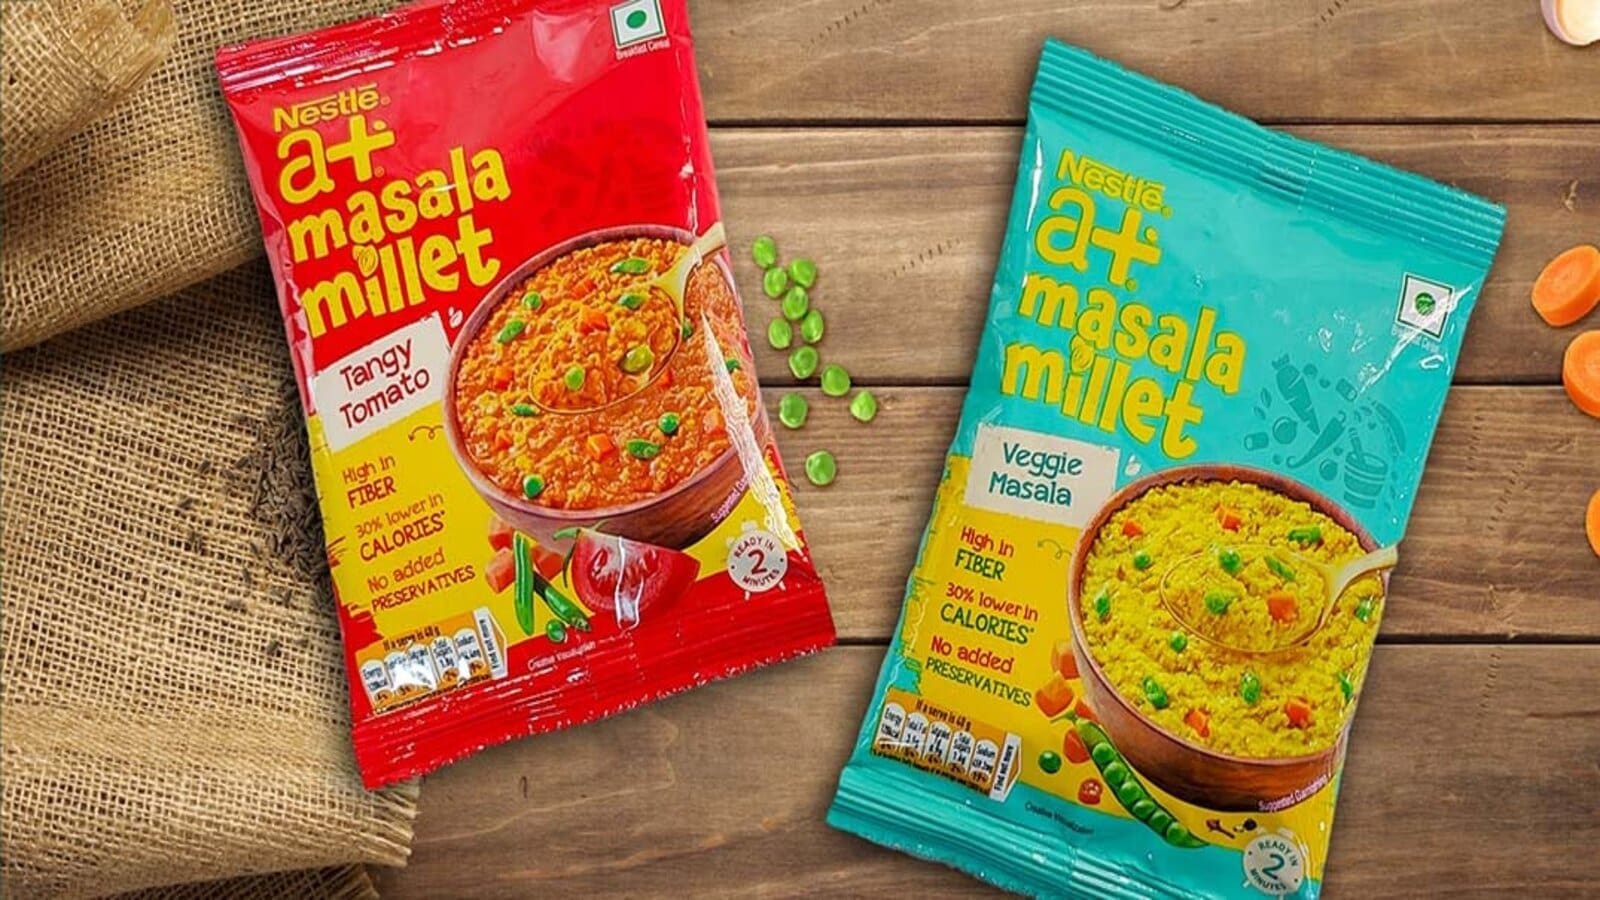 Nestlé India incorporates millet into newly launched a+ Masala porridge